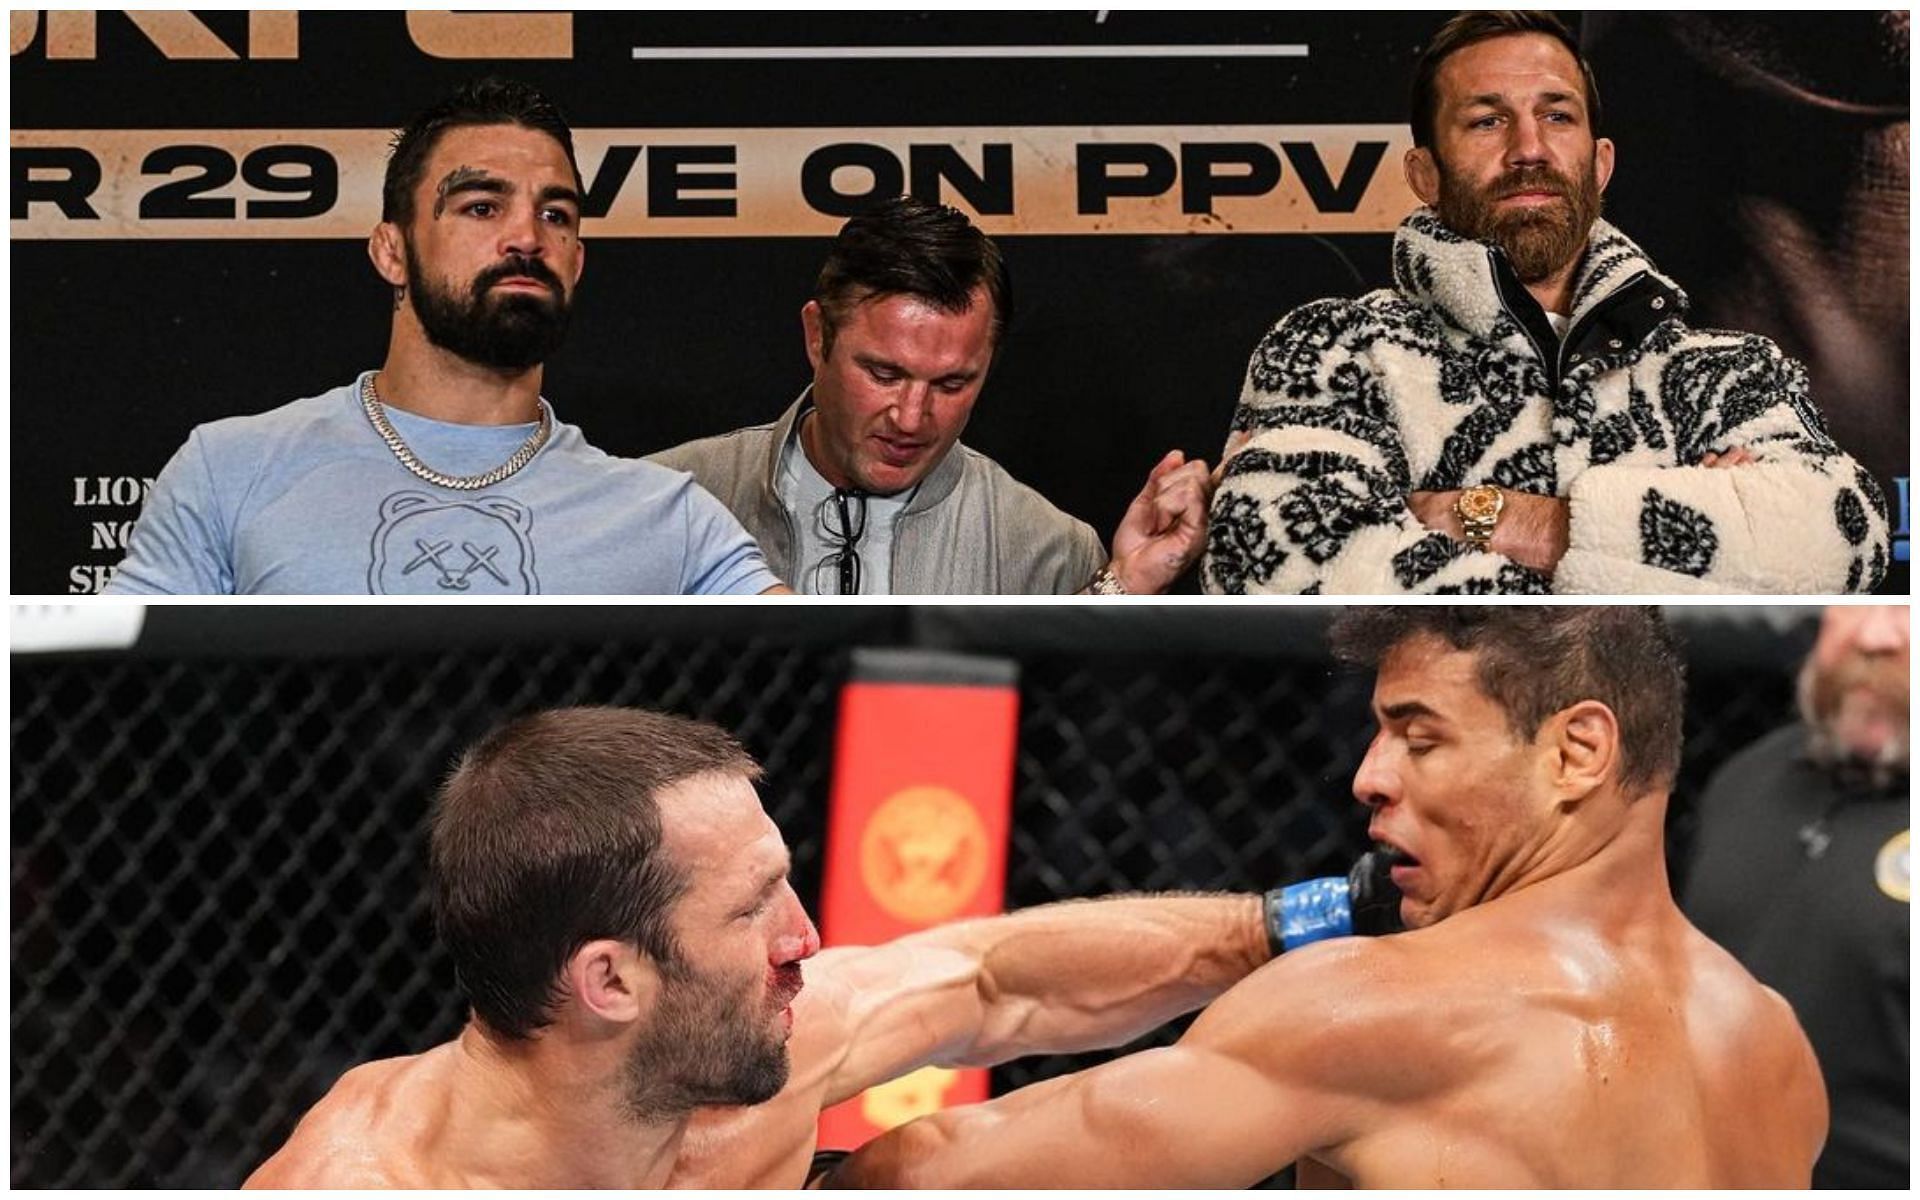 Mike Perry booger incident and Luke Rockhold vs. Paulo Costa